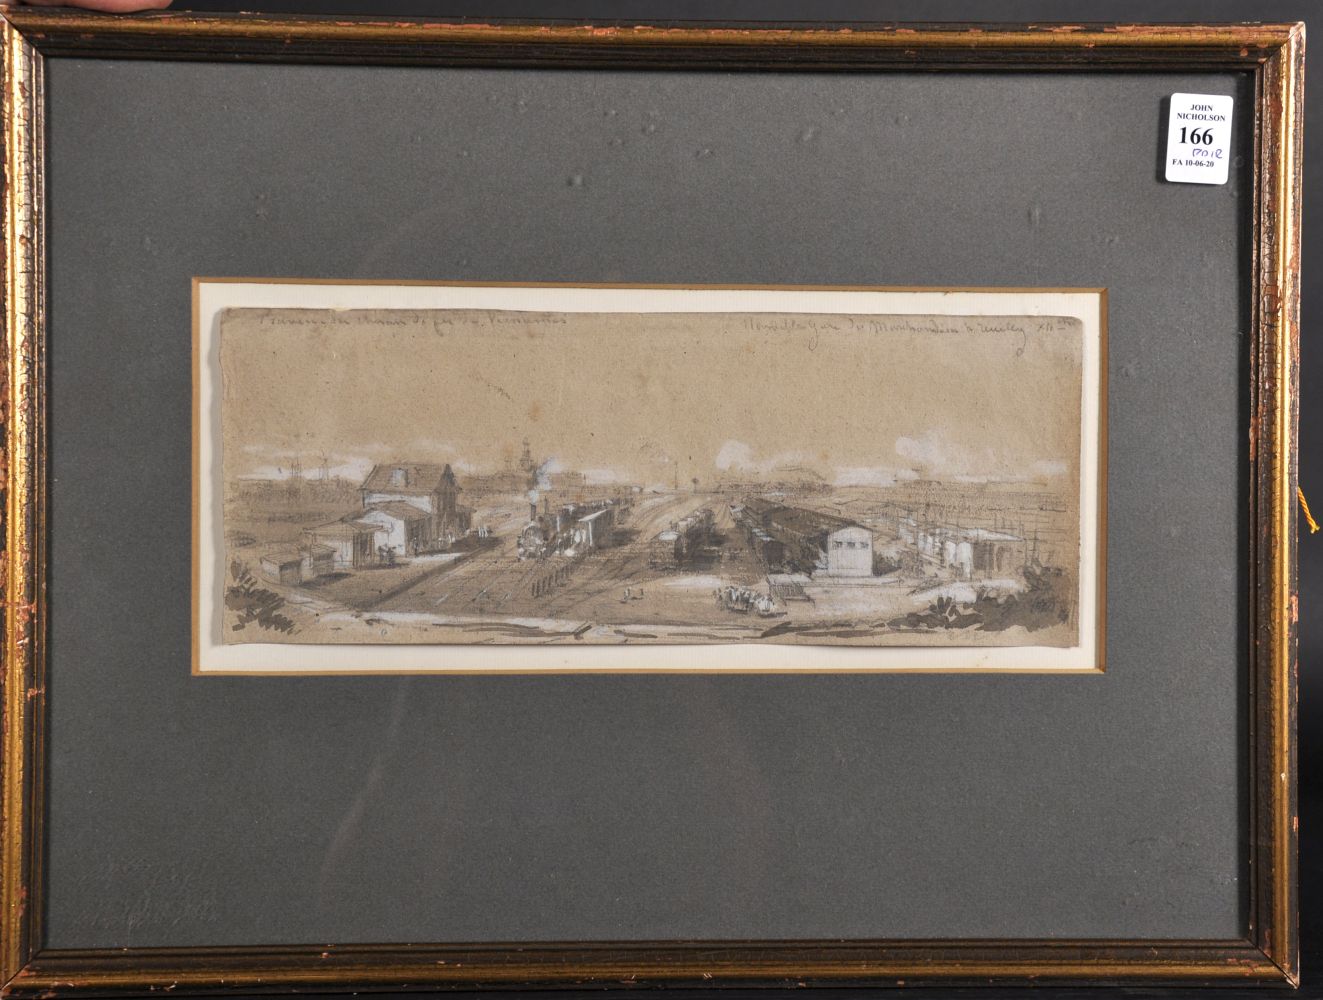 19th Century French School. "Nouvelle Gare de Marchandise, Reuilly, XII e", Study of a Train - Image 2 of 4